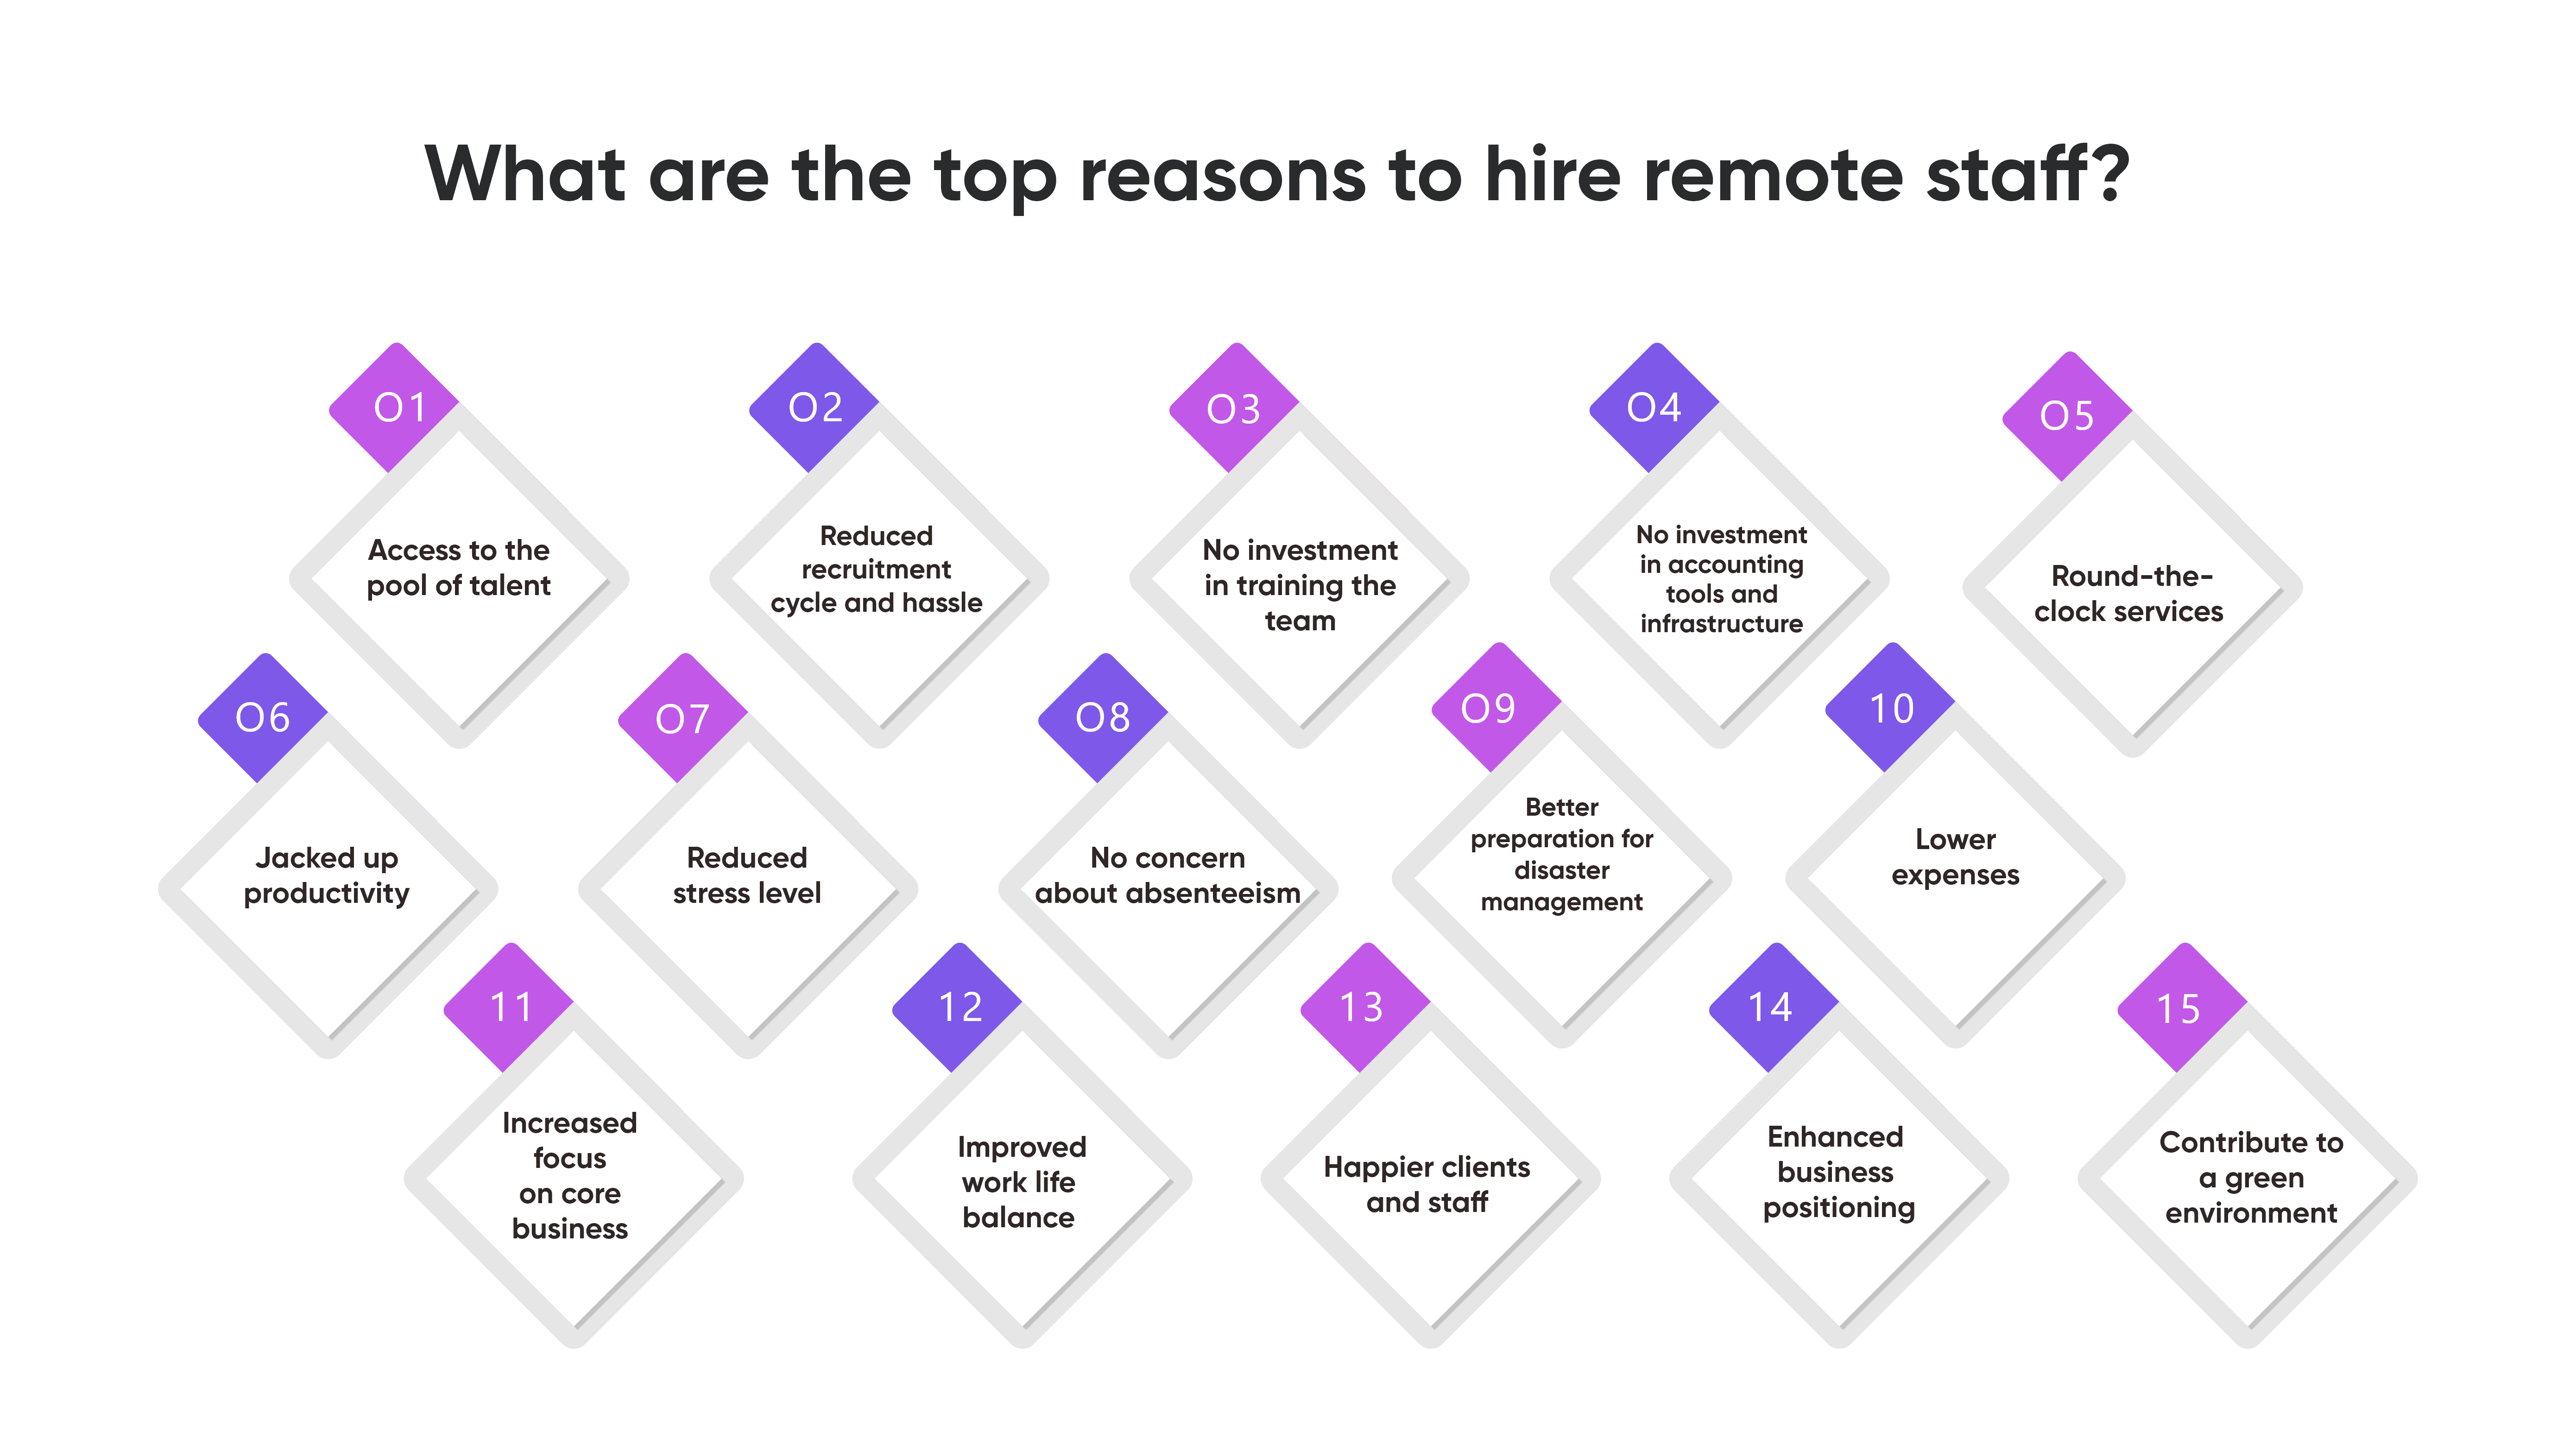 What are the top reasons to hire remote staff